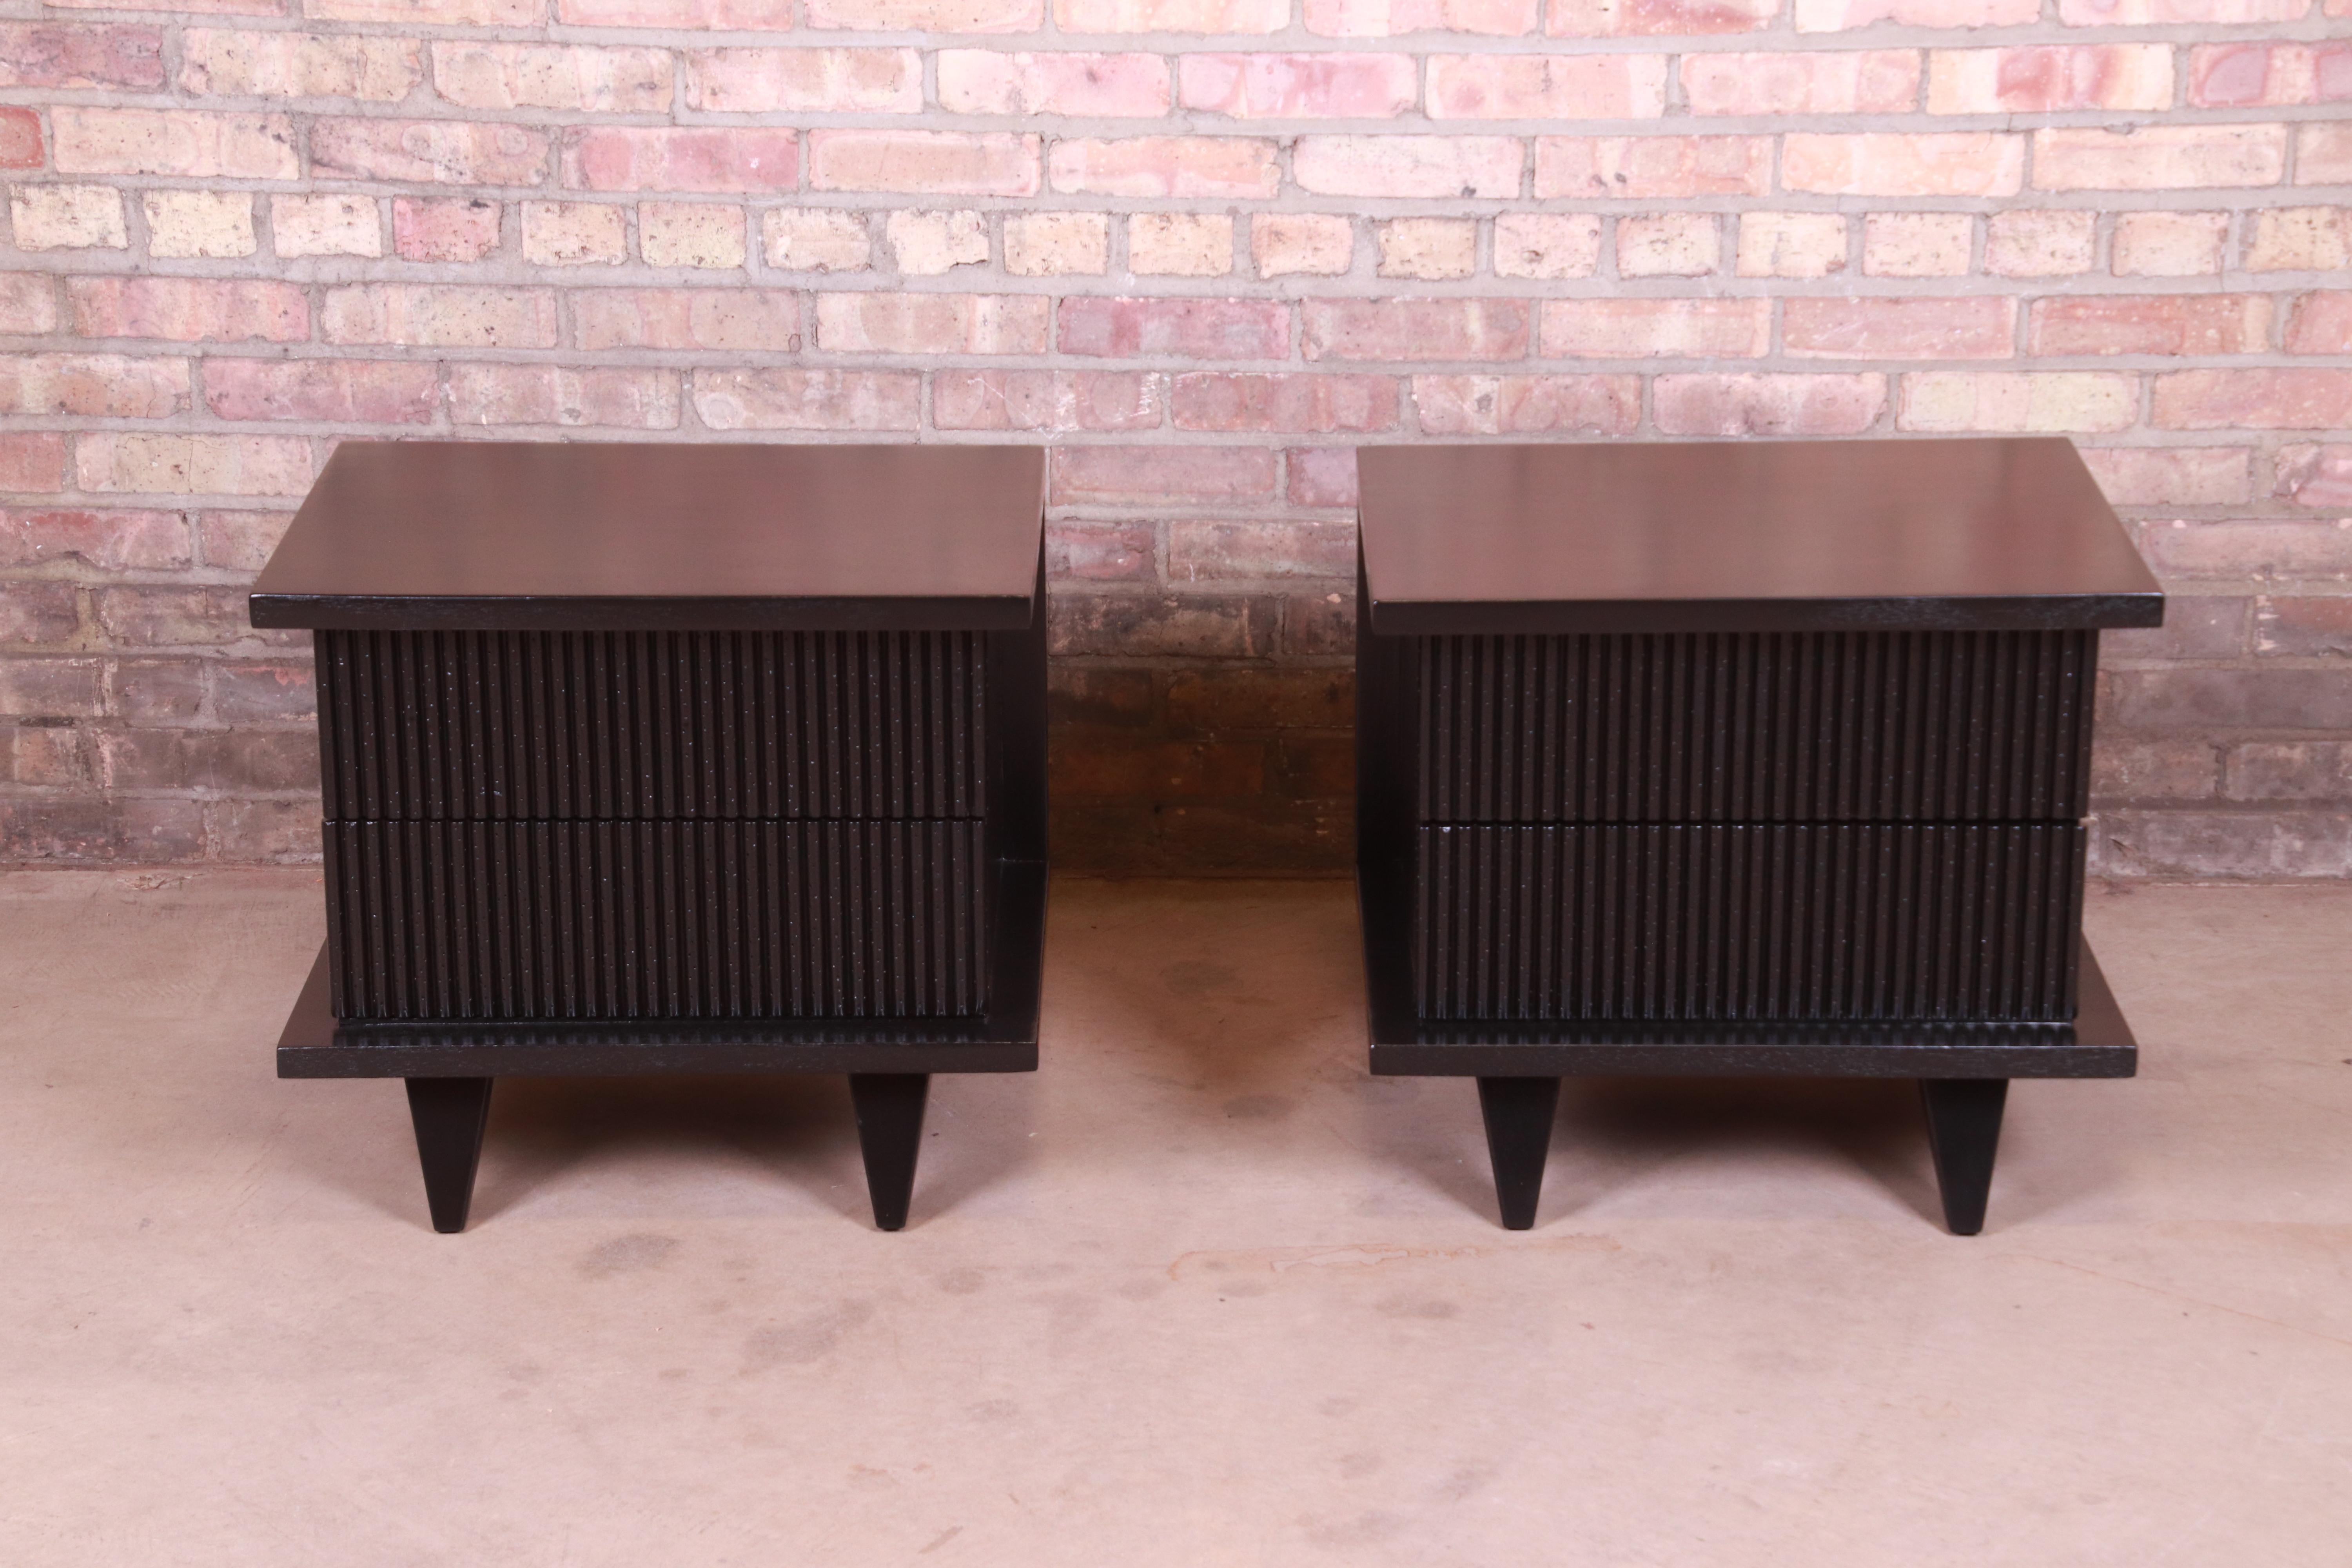 An exceptional pair of Mid-Century Modern black lacquered nightstands

By Merton Gershun for American of Martinsville

USA, 1950s

Black lacquered mahogany, with unique fluted drawer fronts with wormhole accents to add texture. Evident